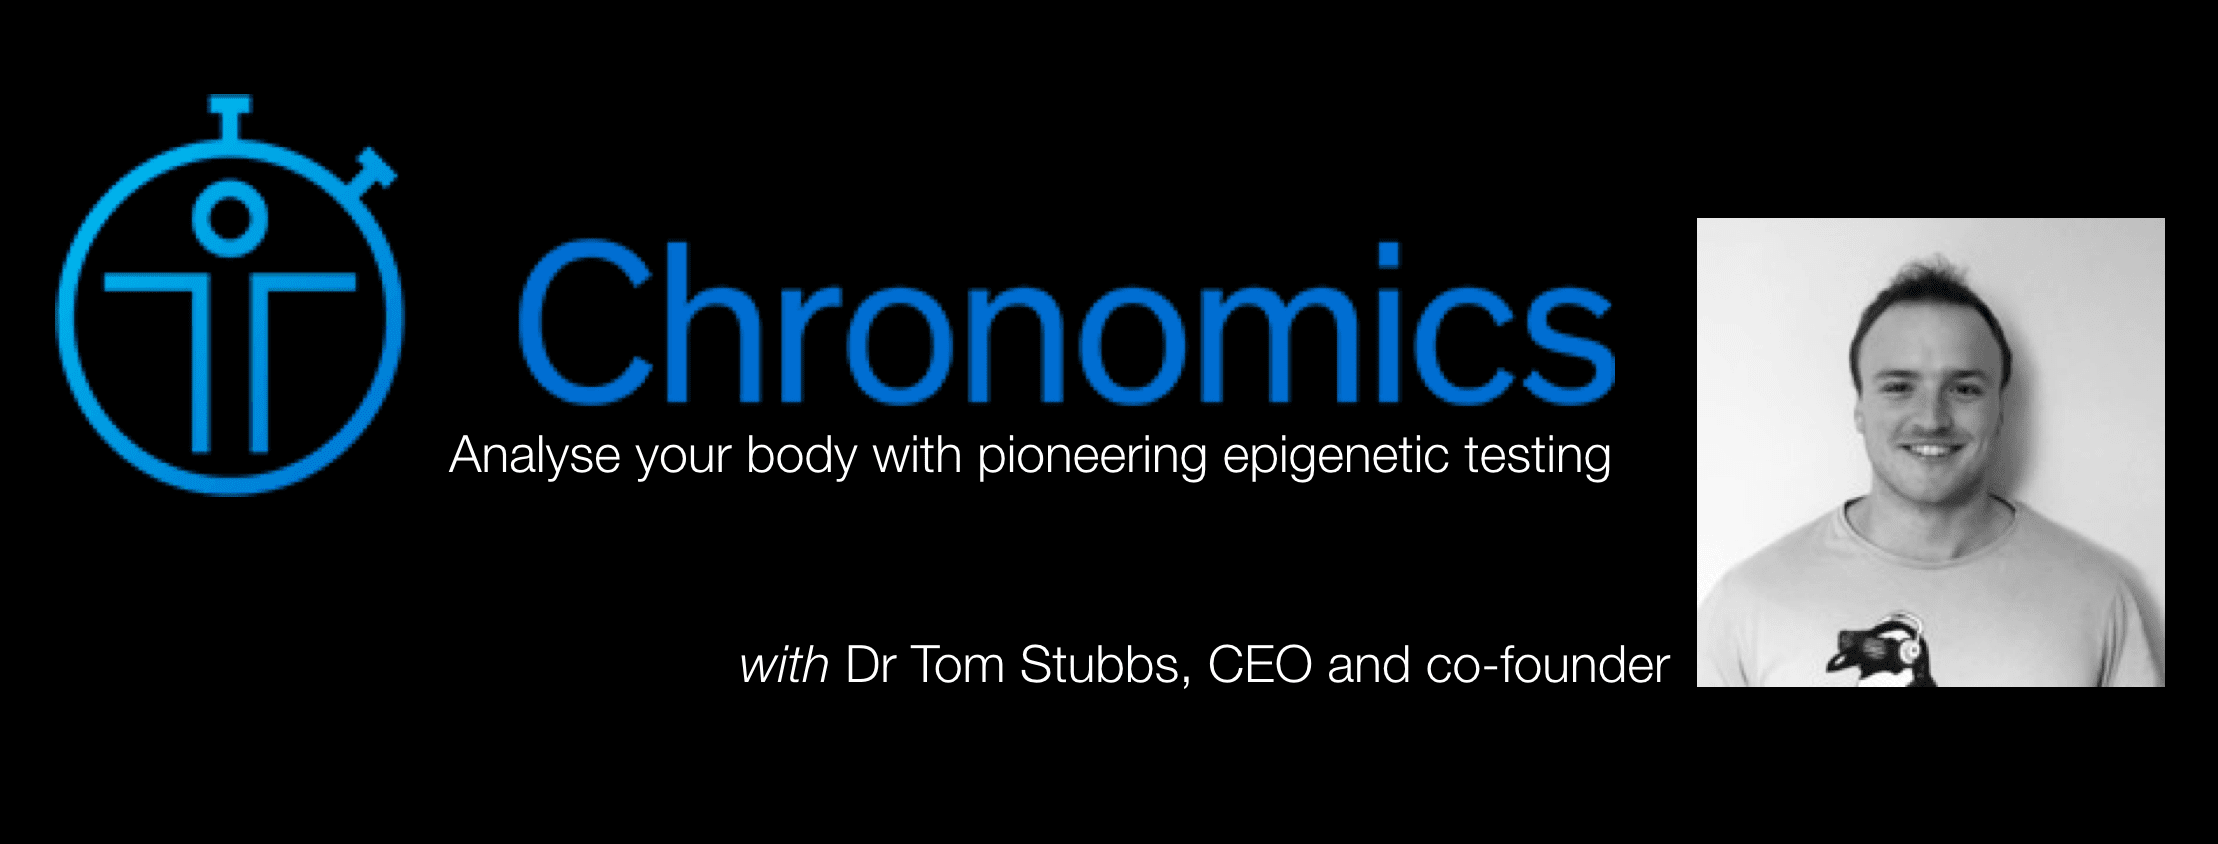 Explore Your Epigenetics For Better Personalised, Preventative Healthcare with Chronomics CEO Dr Tom Stubbs (MDE287)